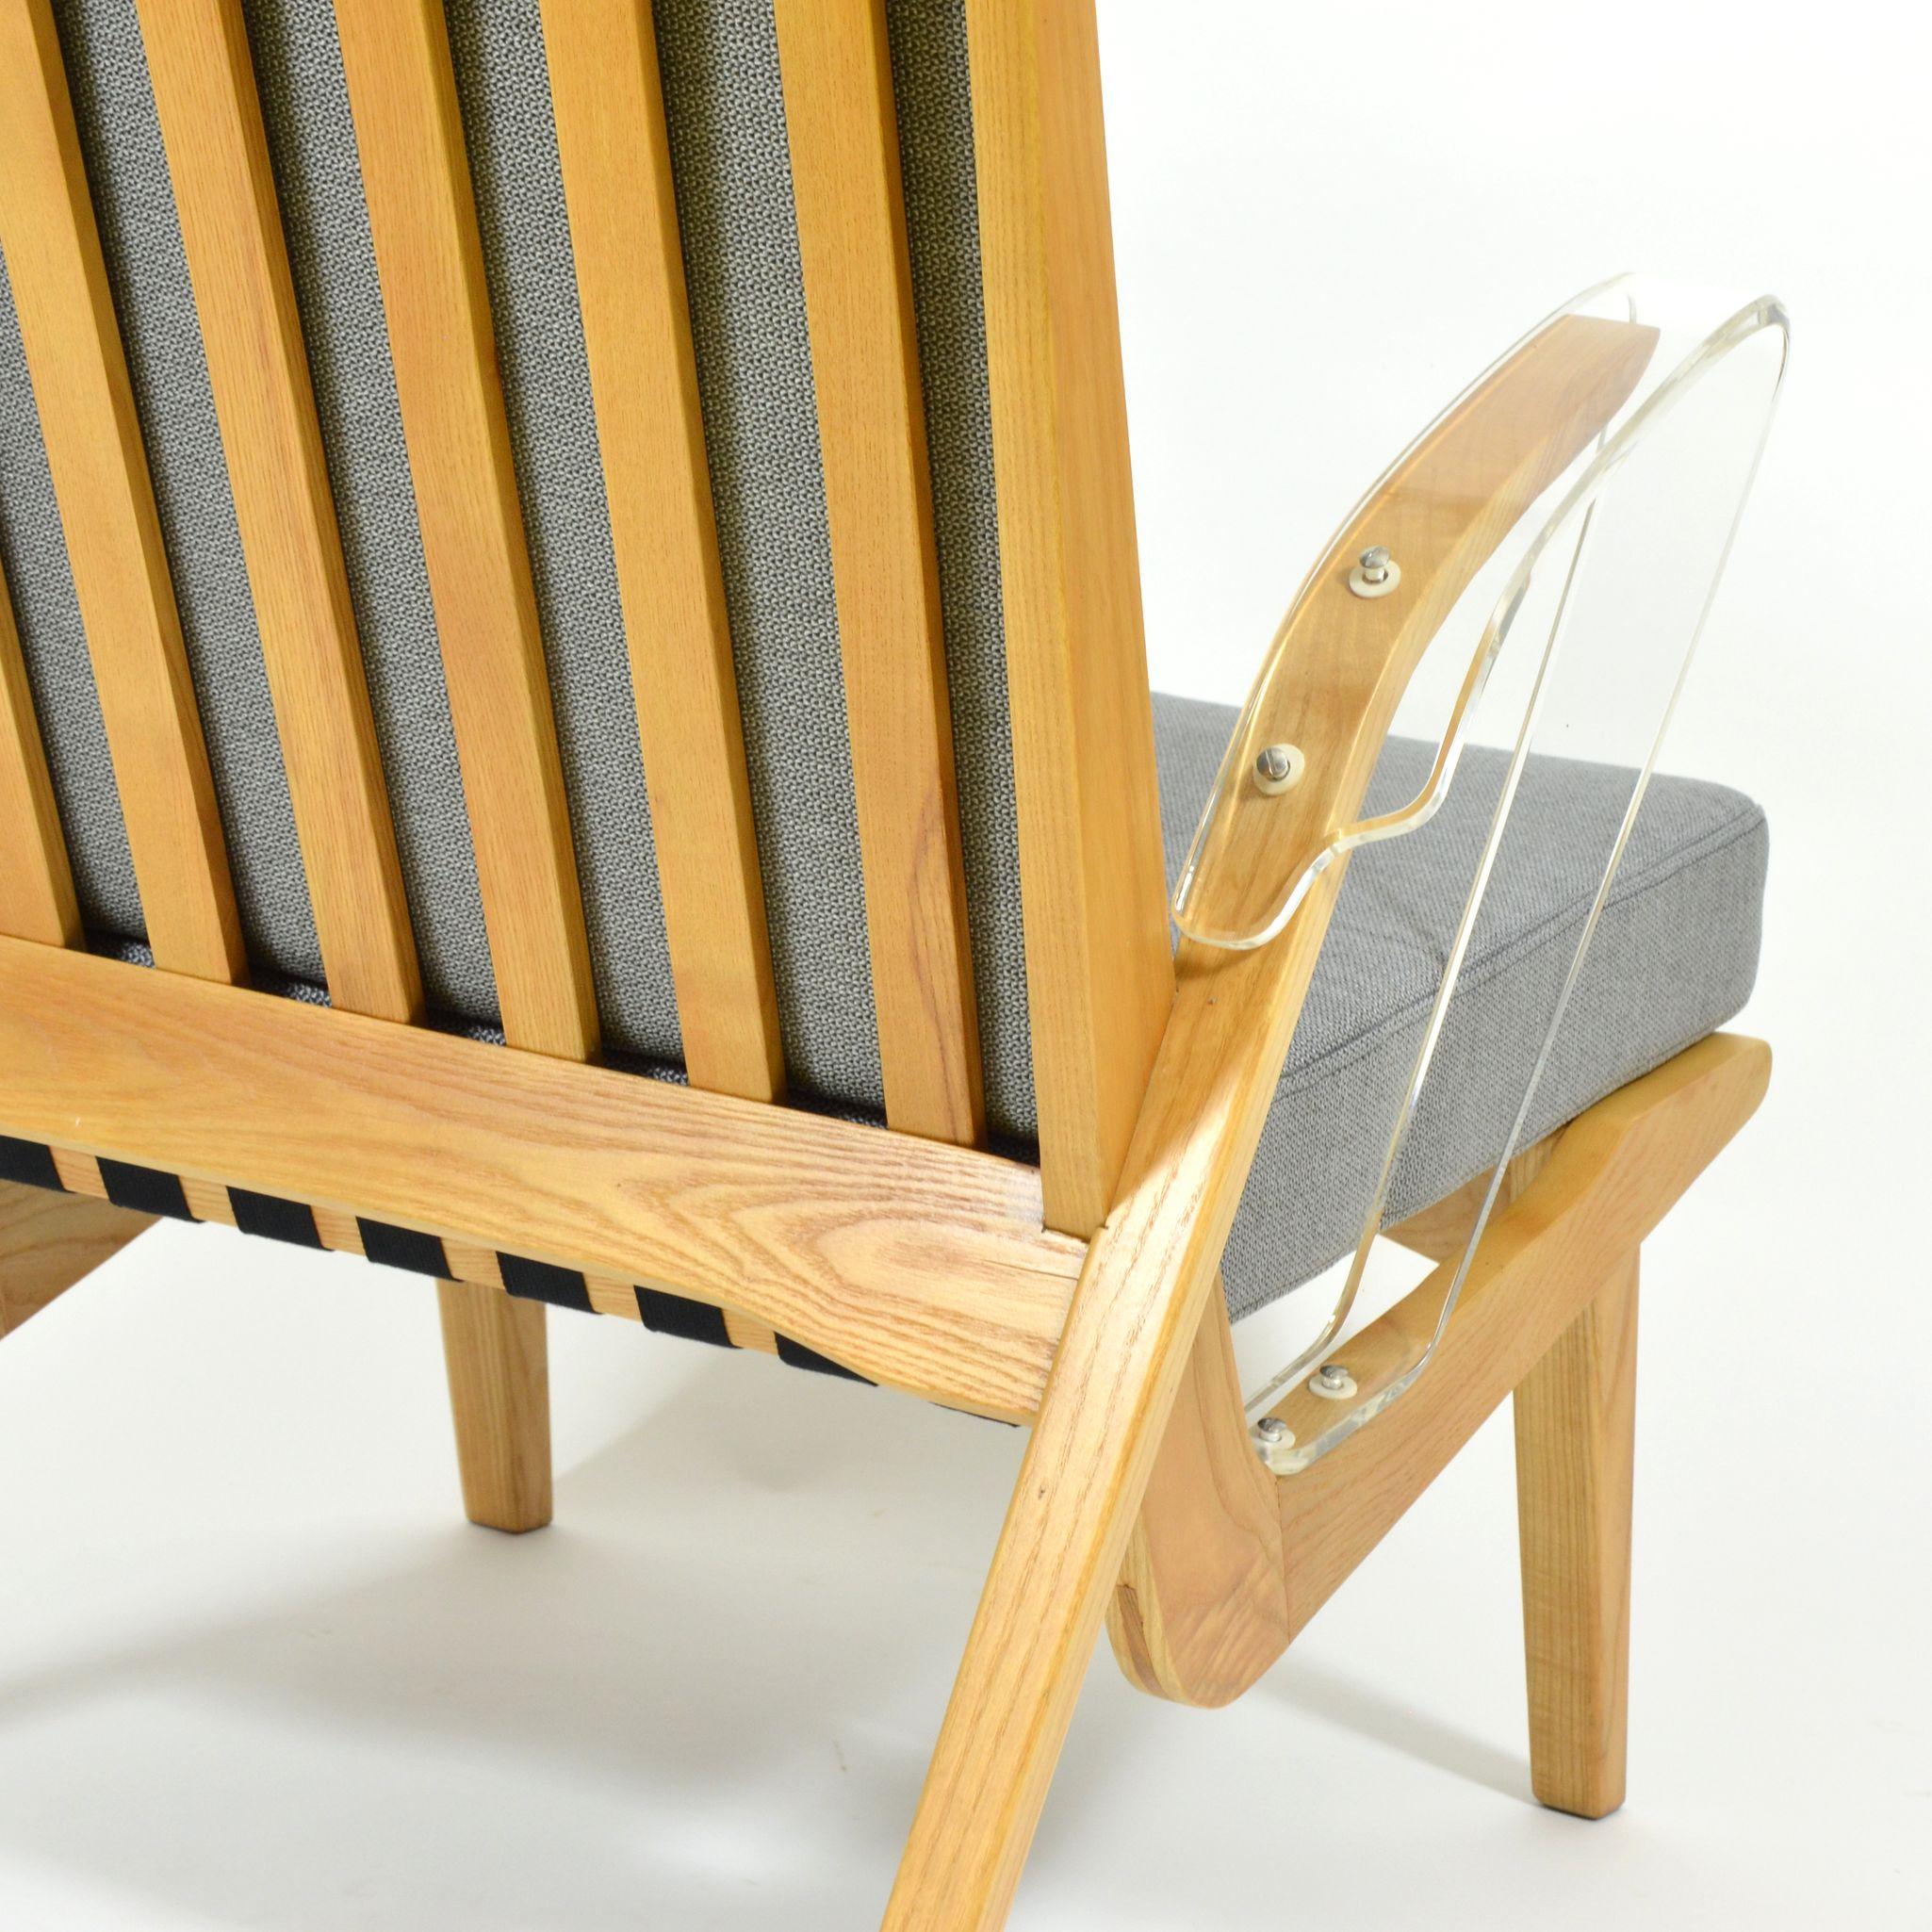 Unique Retro Armchairs from 1970s with Armrests Made of Plexiglass 2